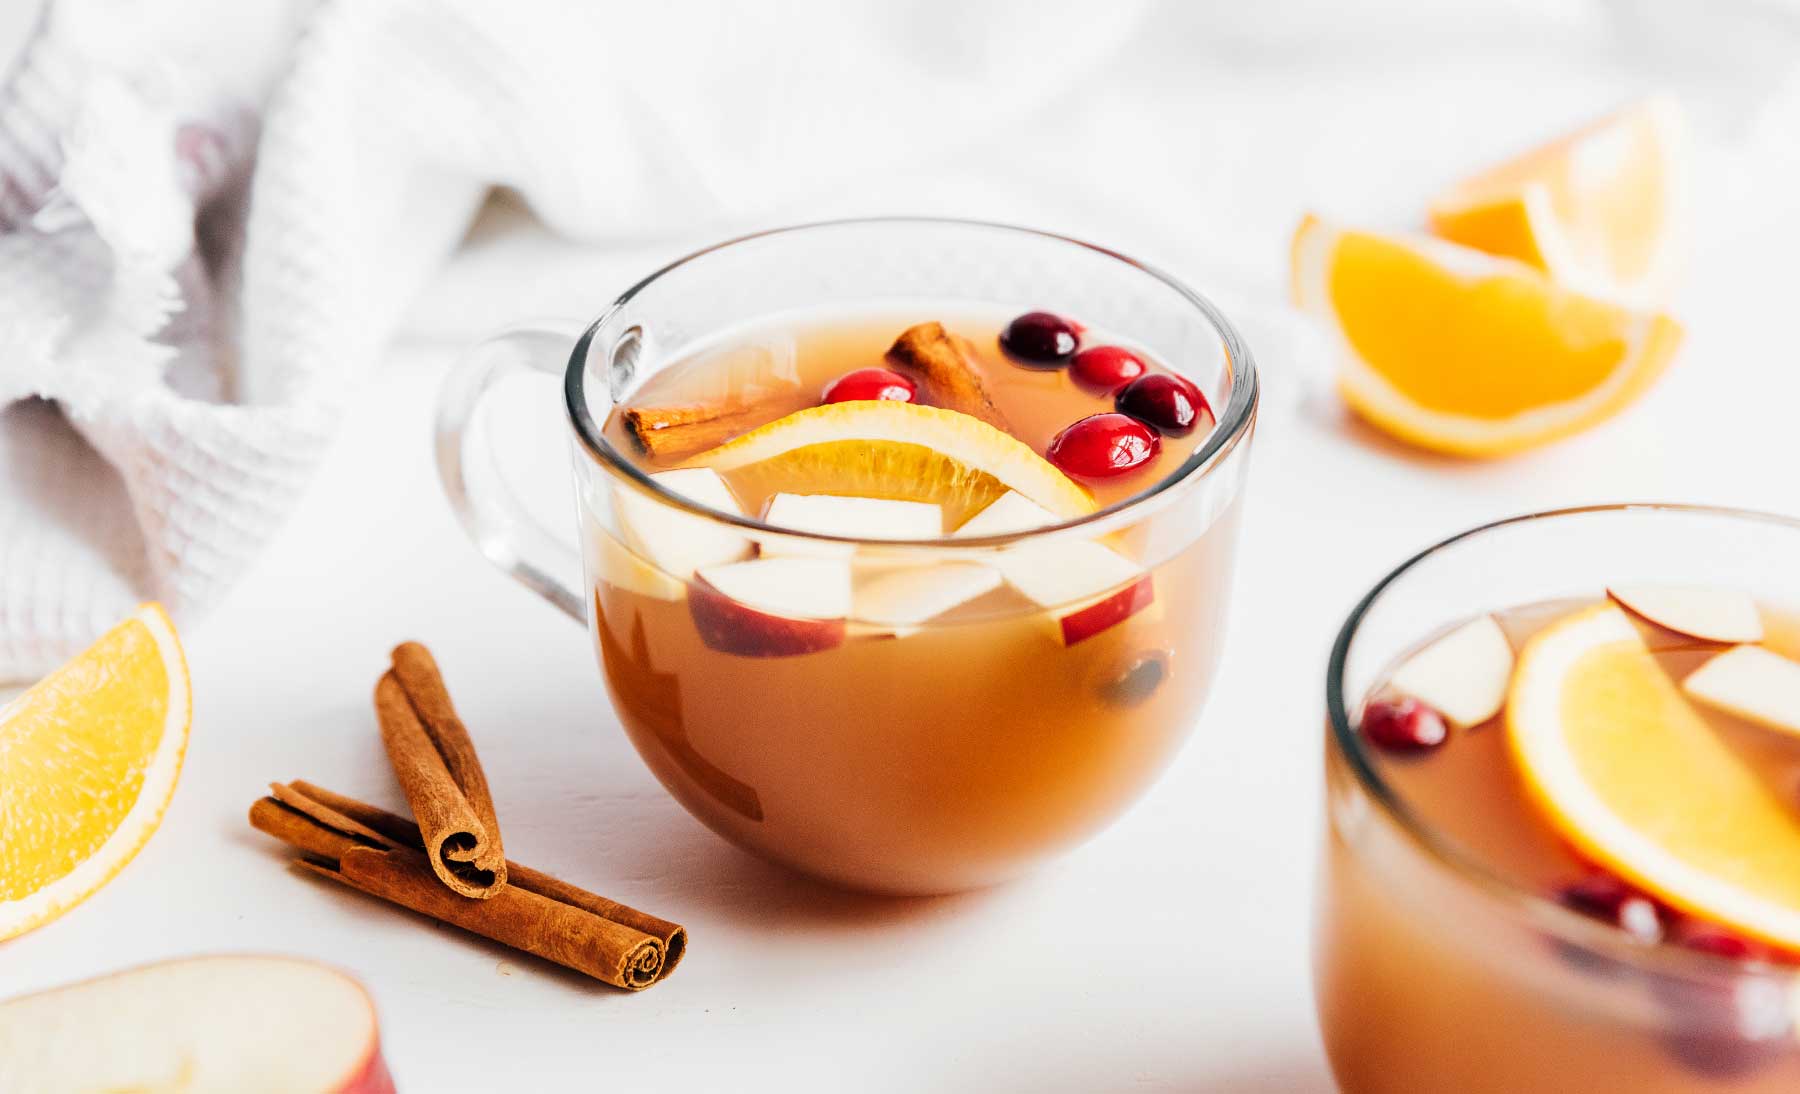 A glass of homemade apple cider garnished with cinnamon sticks, cranberries, and chopped fruit